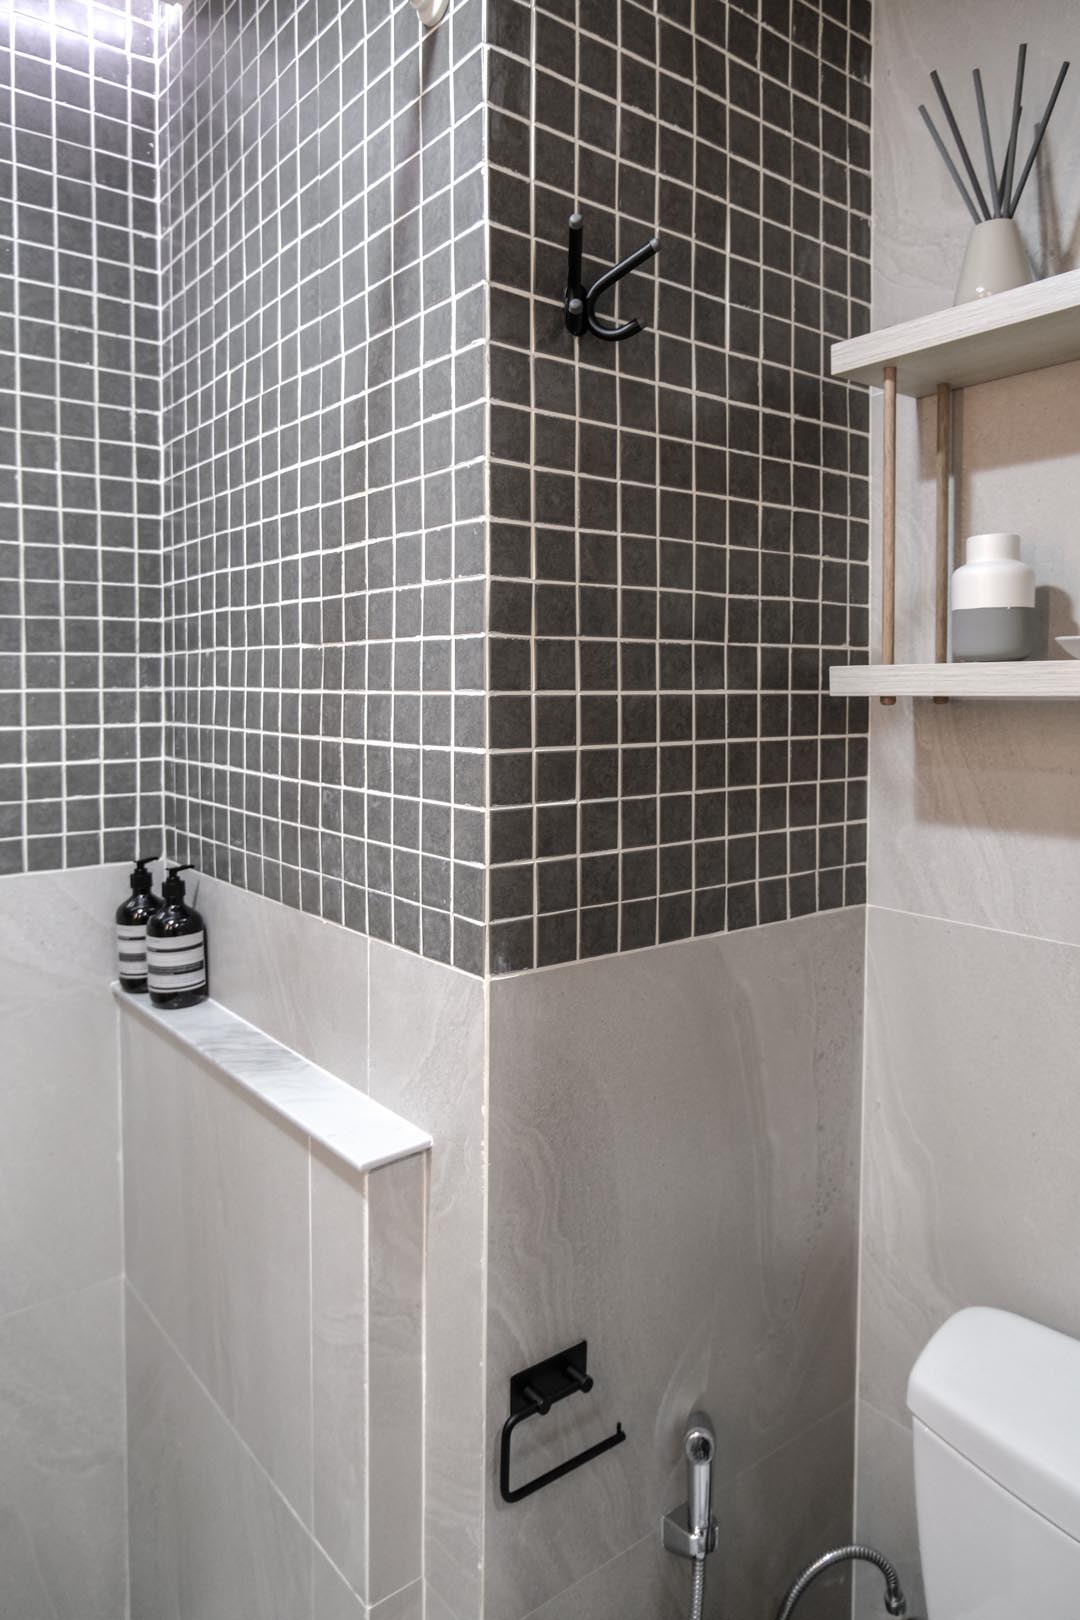 In this small bathroom, large tiles cover the lower half of the walls, while the upper half is covered in square gray tiles.